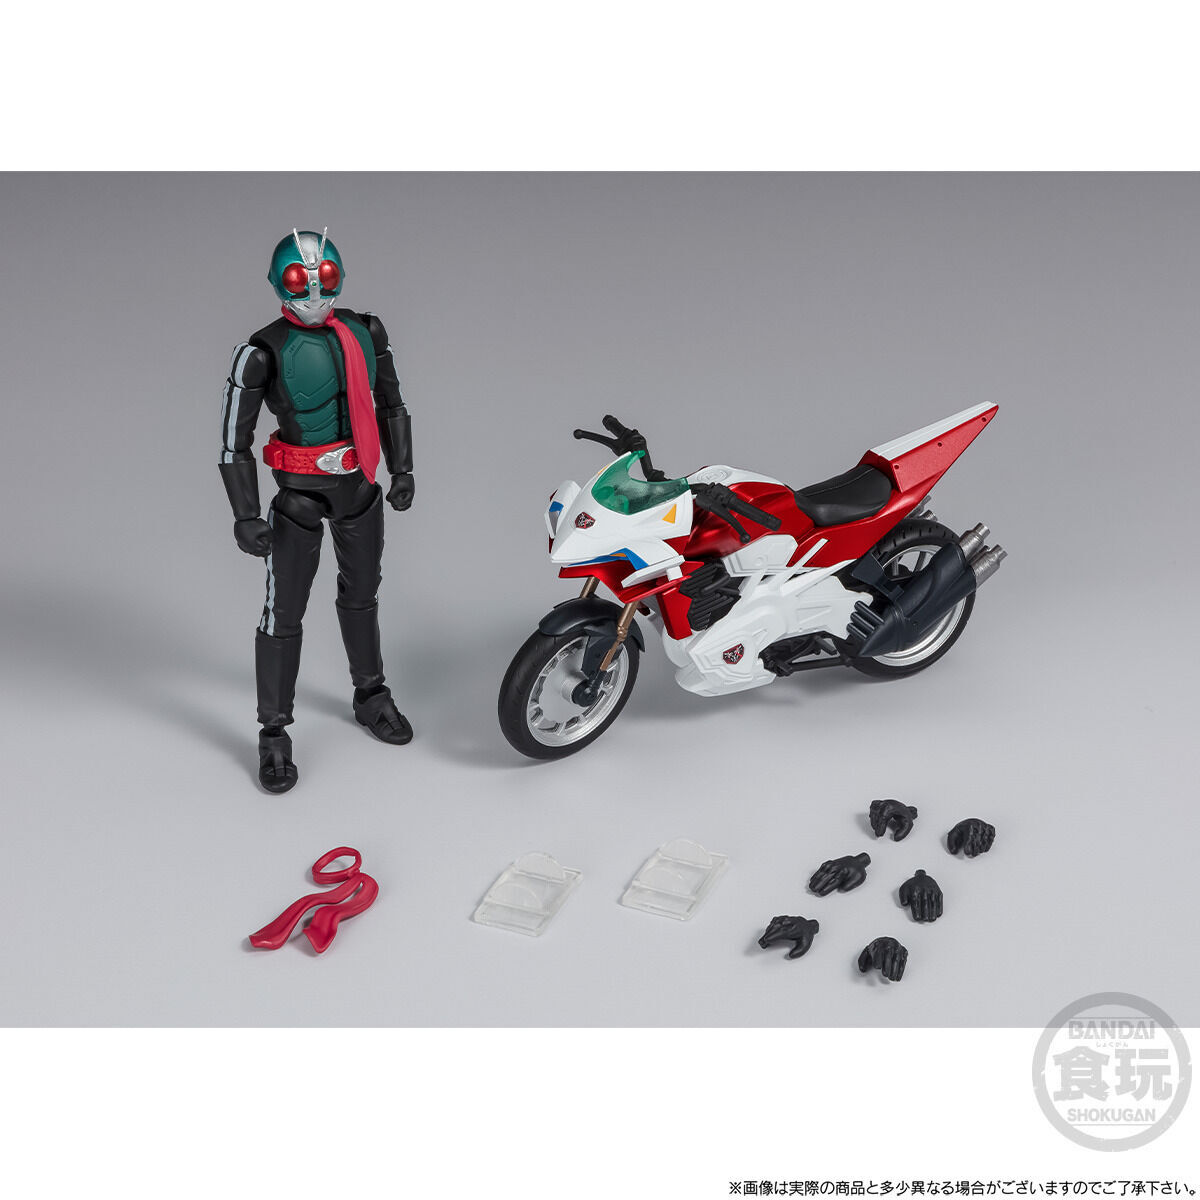 s.h.figuarts シン・仮面ライダー 1号＆2号＆サイクロン号 セット